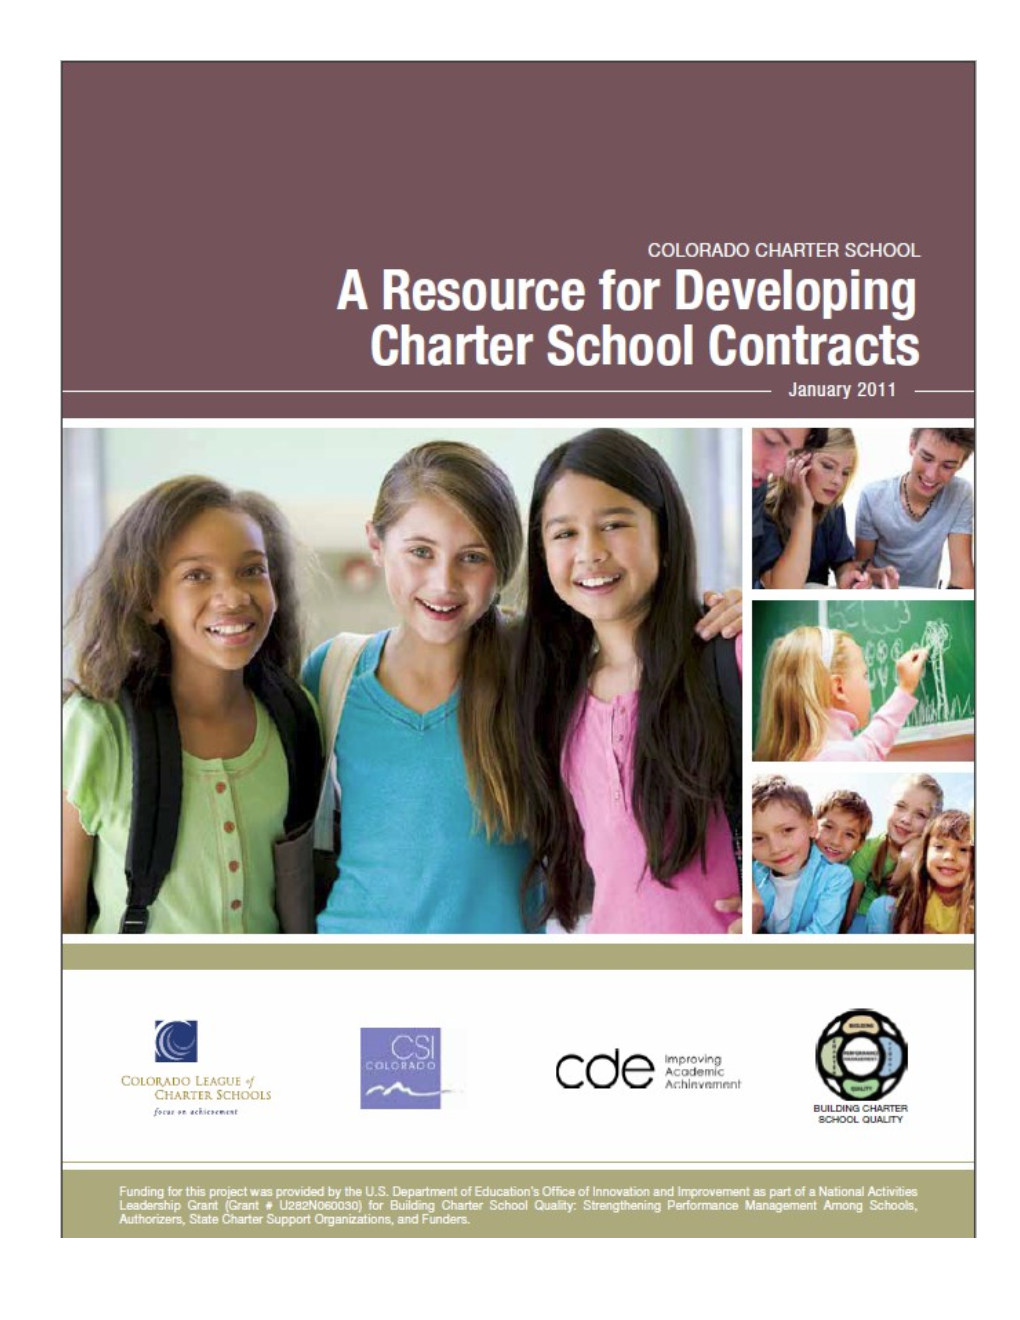 Colorado Charter School a Resource for Developing Charter School Contracts